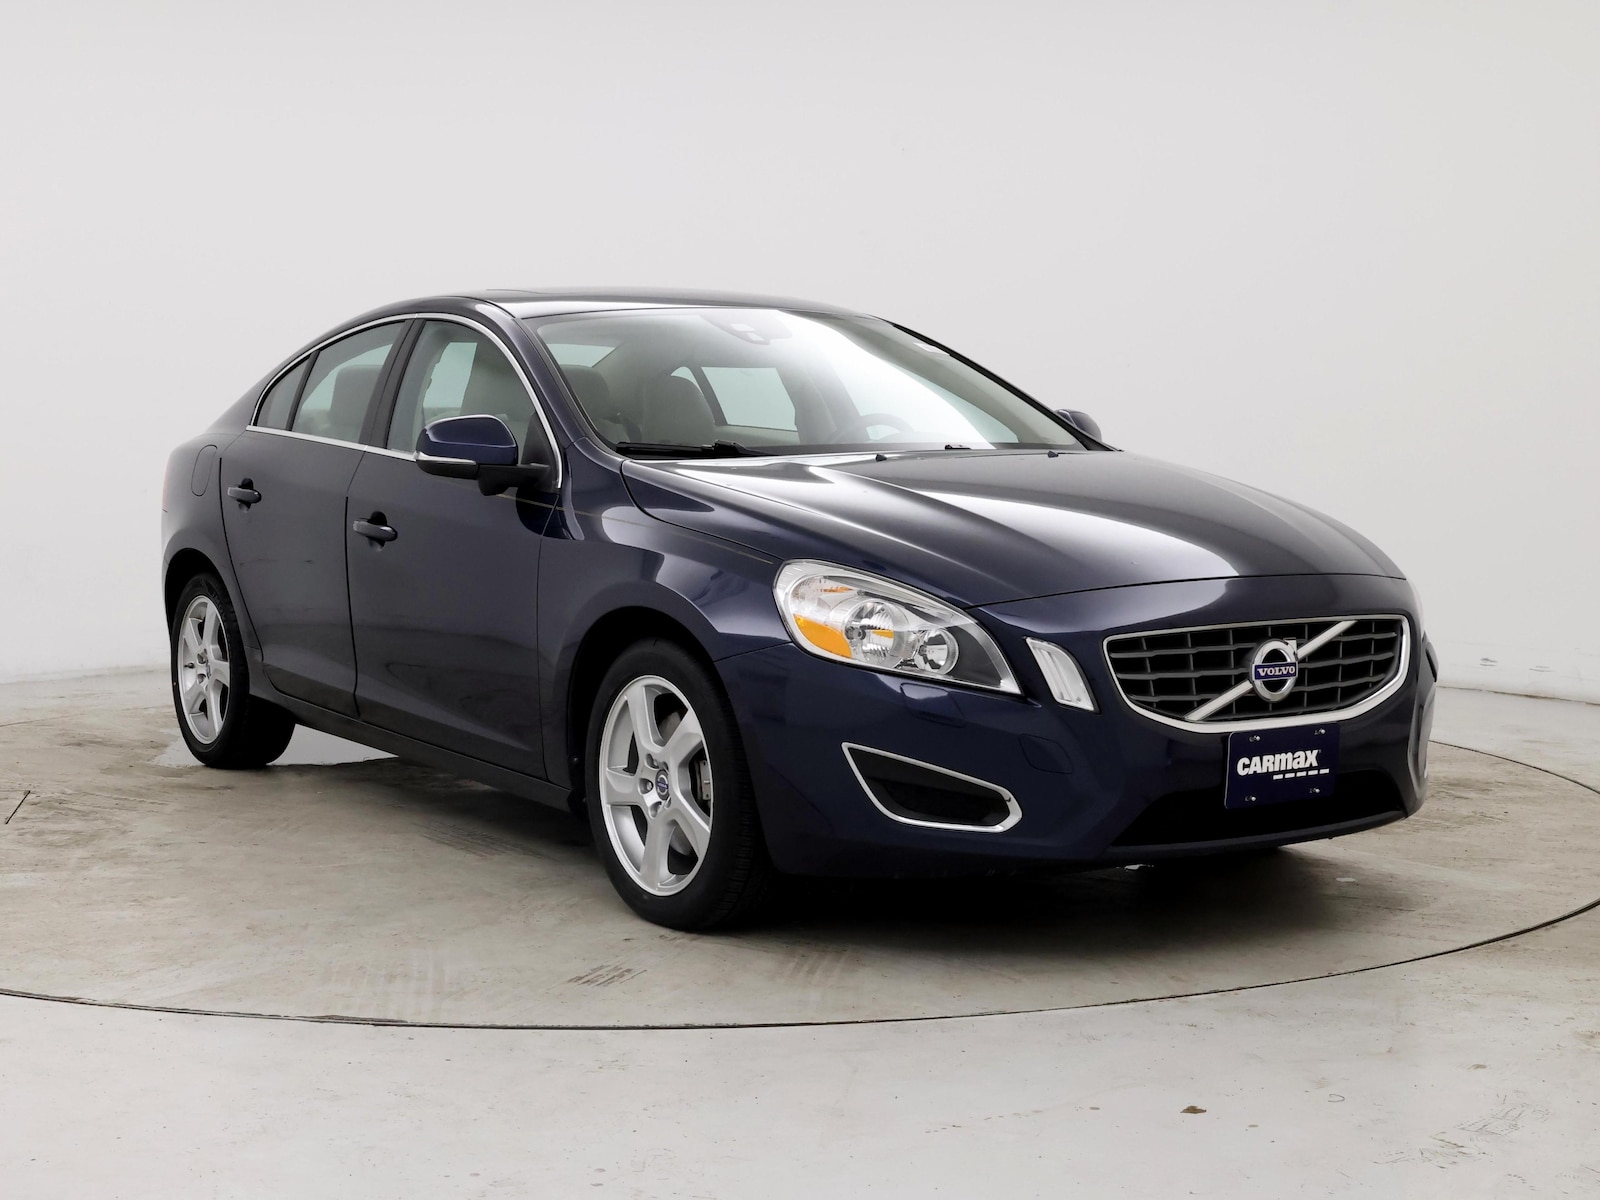 Used 2013 Volvo S60 T5 with VIN YV1612FS5D2206155 for sale in Spokane Valley, WA